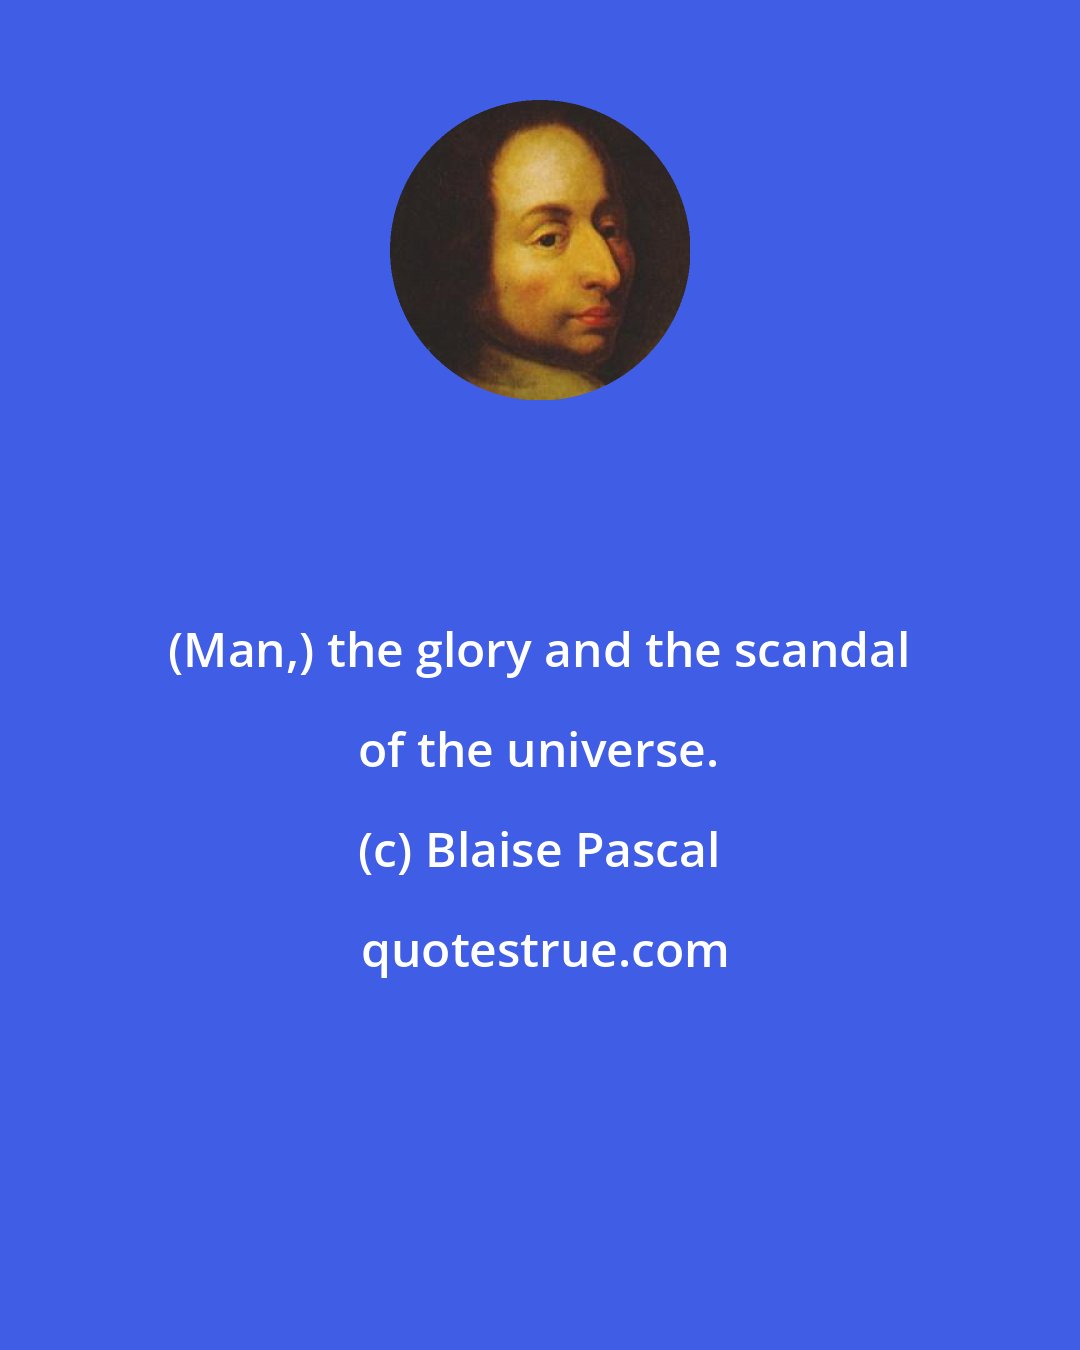 Blaise Pascal: (Man,) the glory and the scandal of the universe.